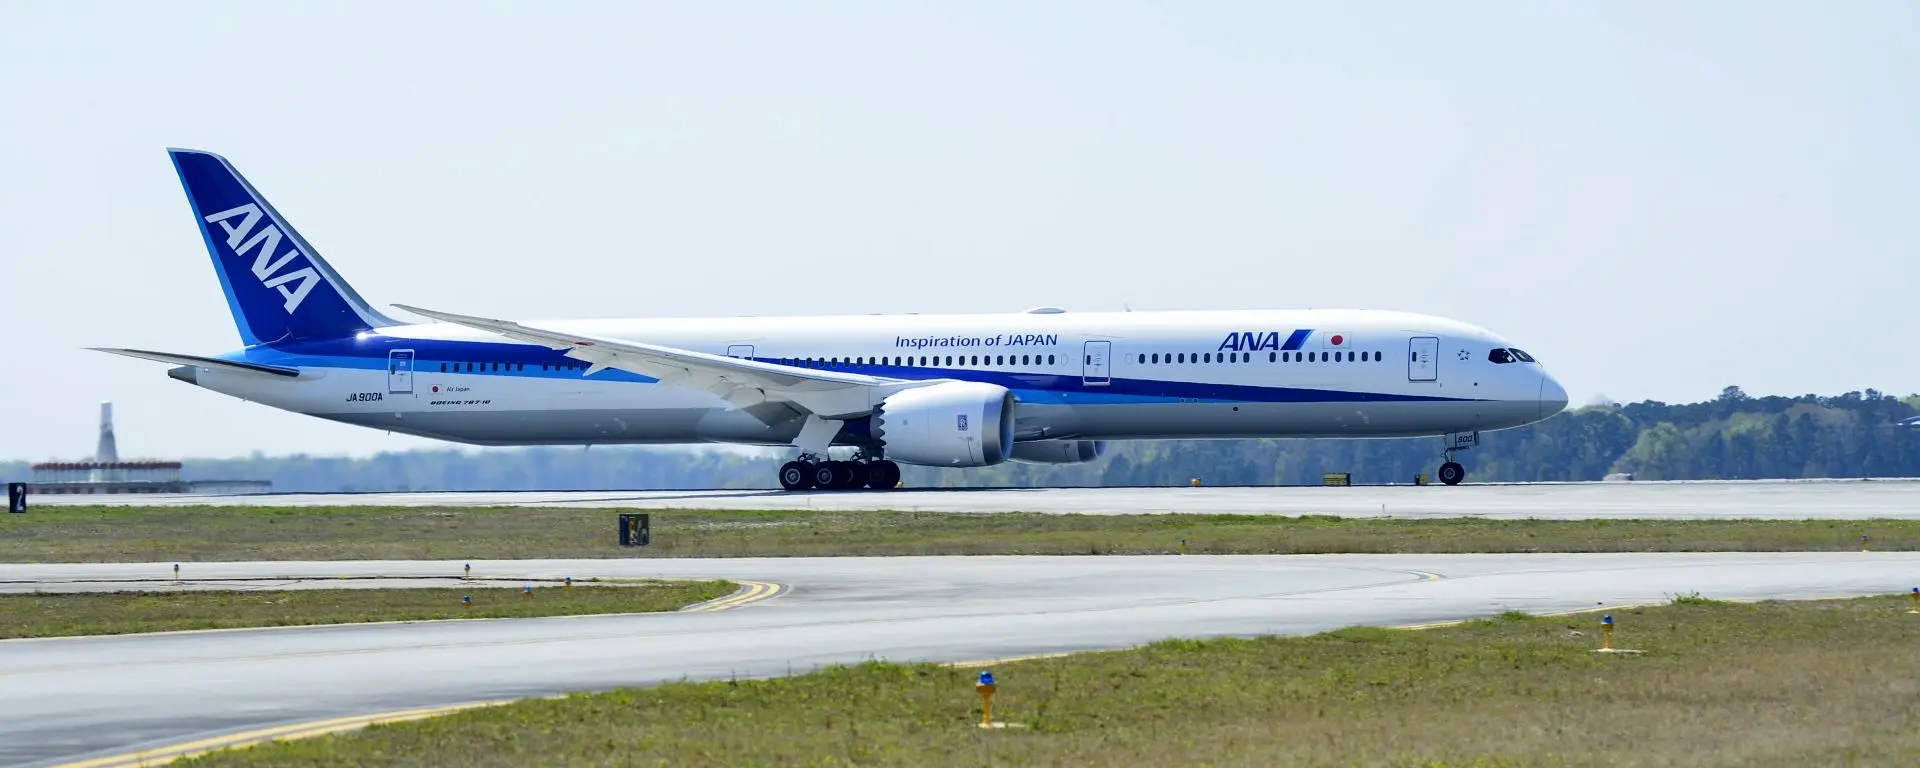 ANA – All Nippon Airways takes delivery of airline’s first Boeing 787-10 Dreamliner